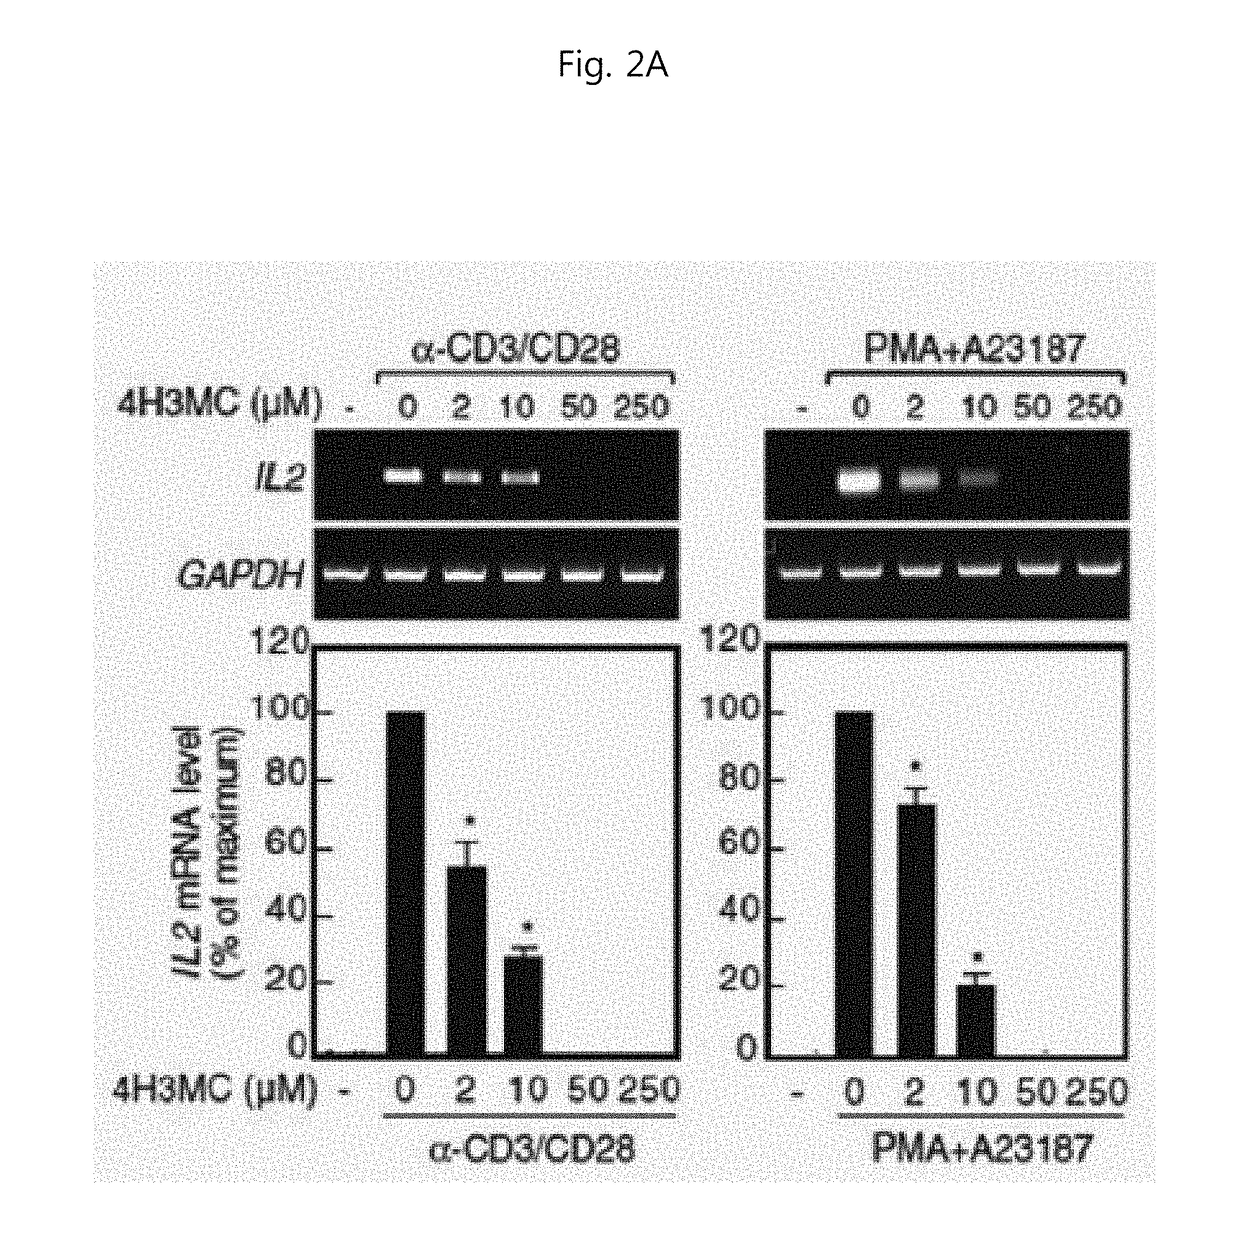 Pharmaceutical Compositions for Preventing and Treating Th1 or Th2 mediated Immune Disease Comprising 4H3MC(4-Hydroxy-3-methoxycinnamaldehyde) as an Active Ingredient